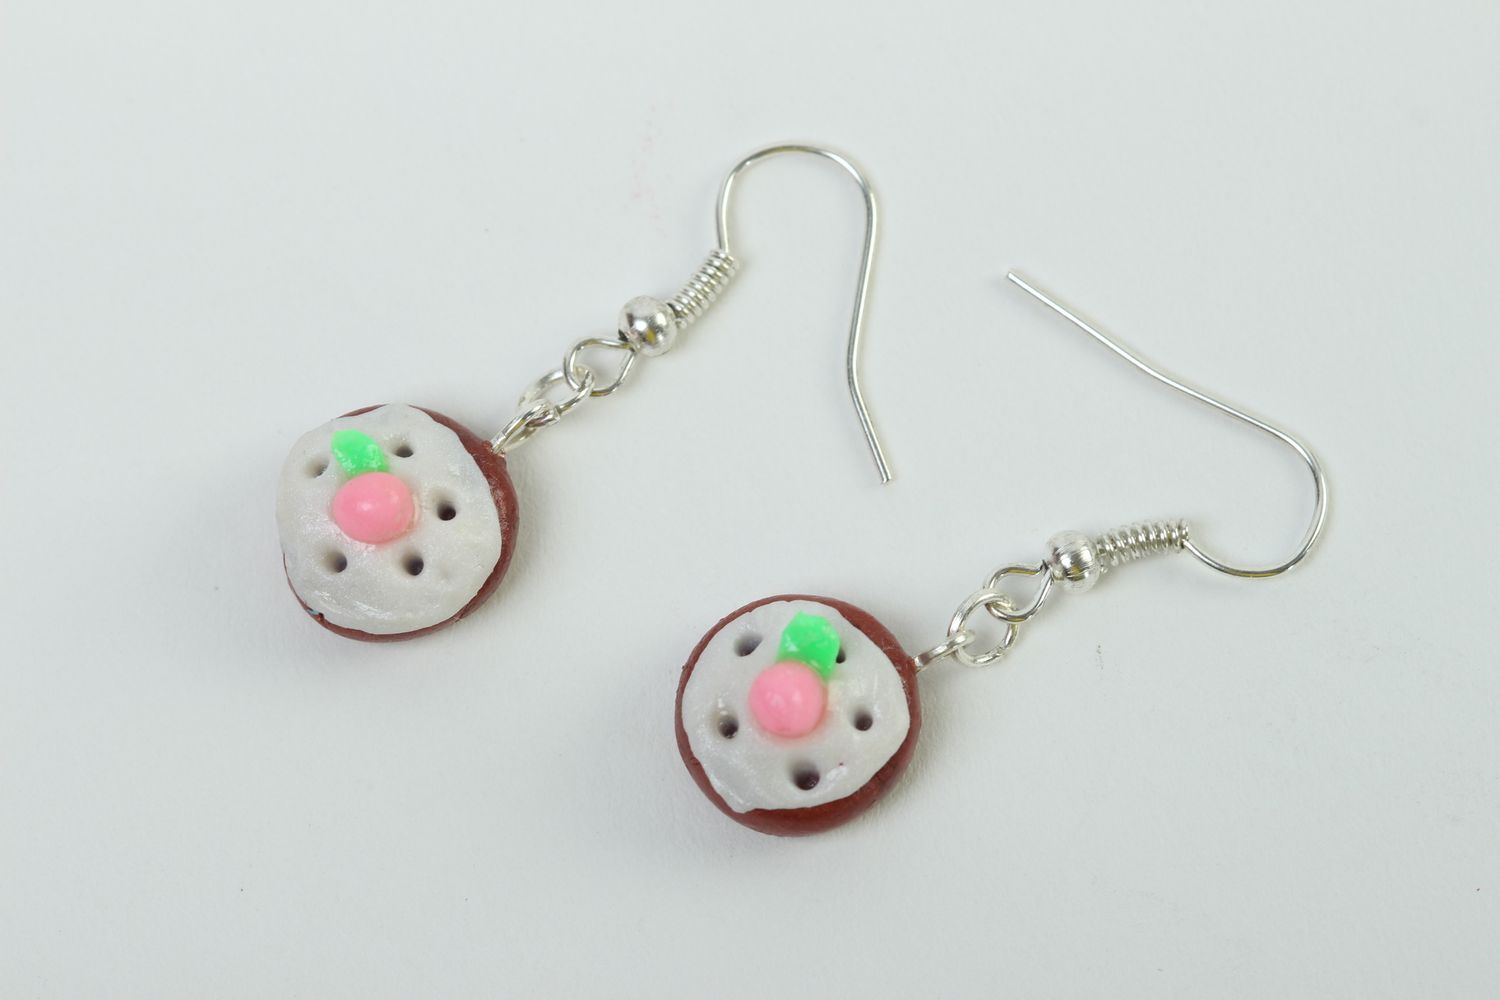 Stylish polymer clay earrings with charms handmade accessories for stylish girl photo 2